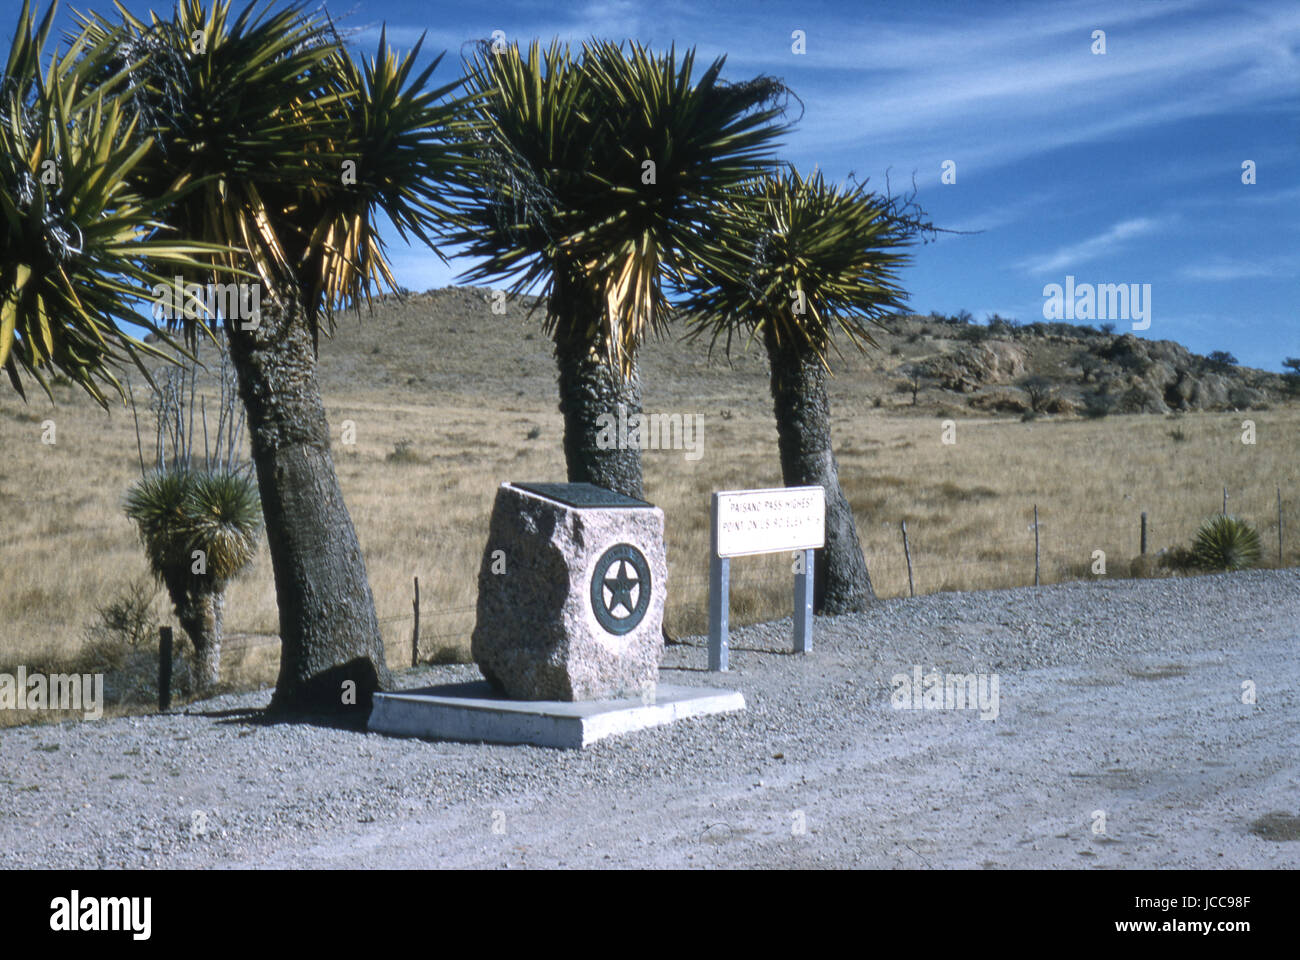 Antique January 1959 photograph, marble marker and sign for Paisano Pass, the highest point on US 90 in Marfa, Texas. SOURCE: ORIGINAL 35mm TRANSPARENCY. Stock Photo